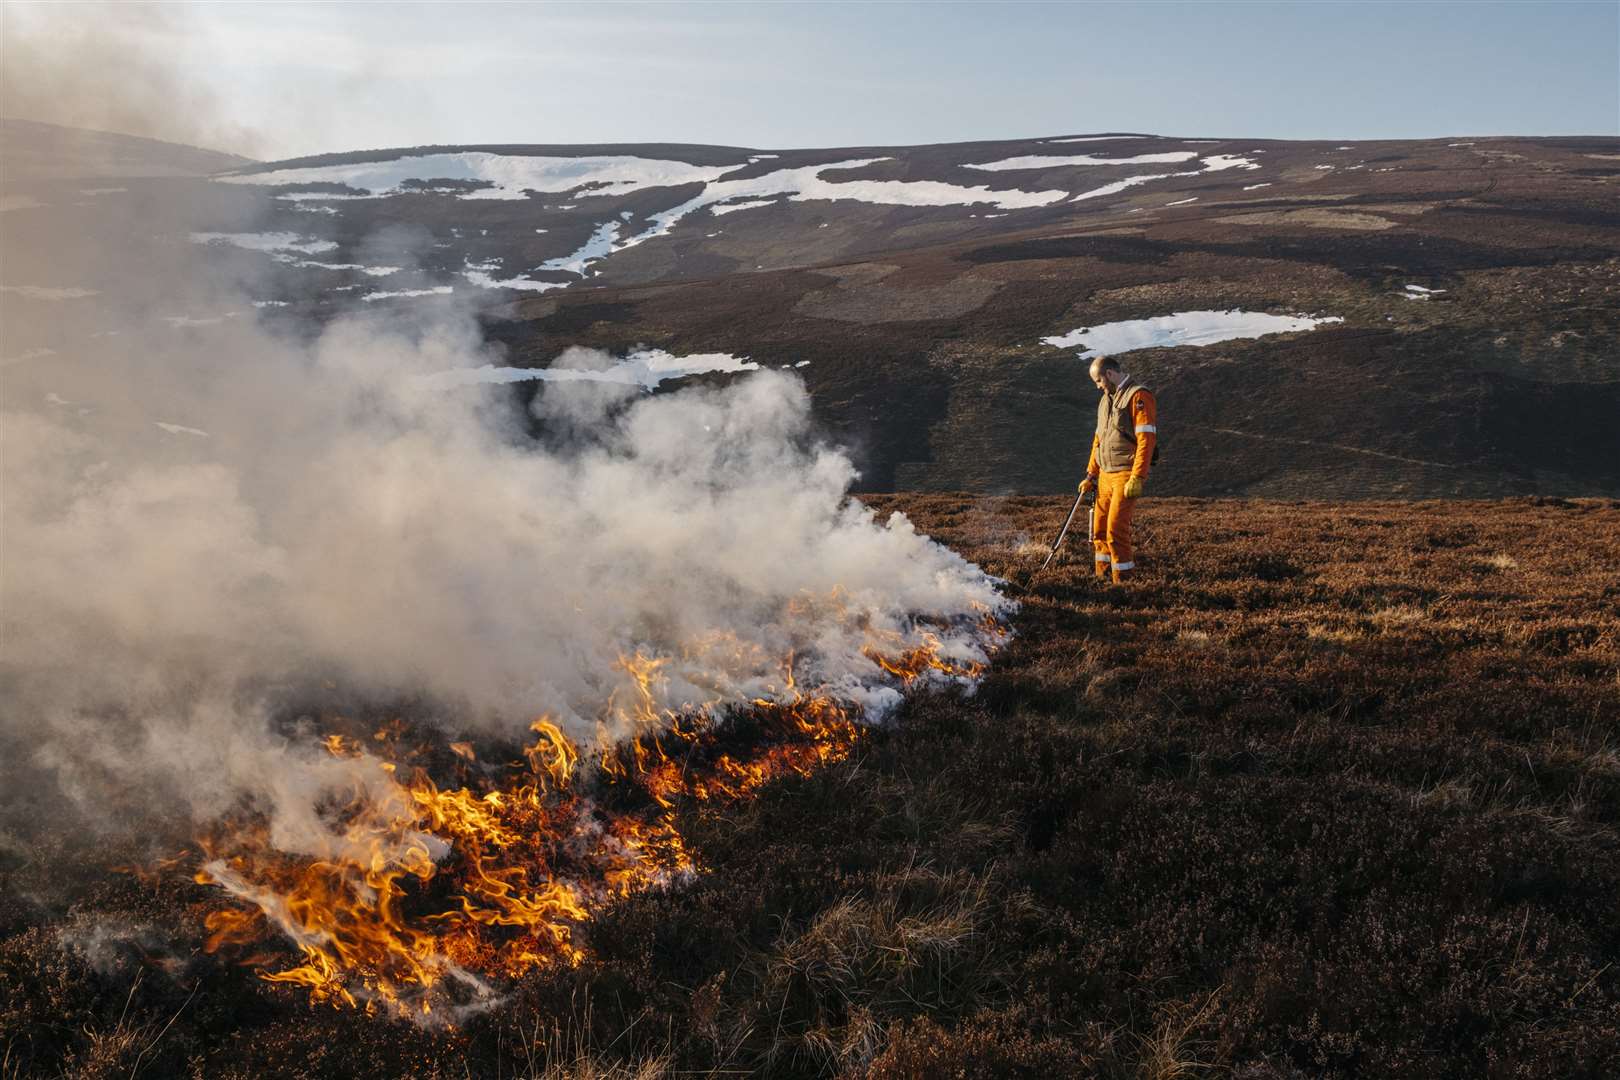 A gamekeeper using controlled fire.